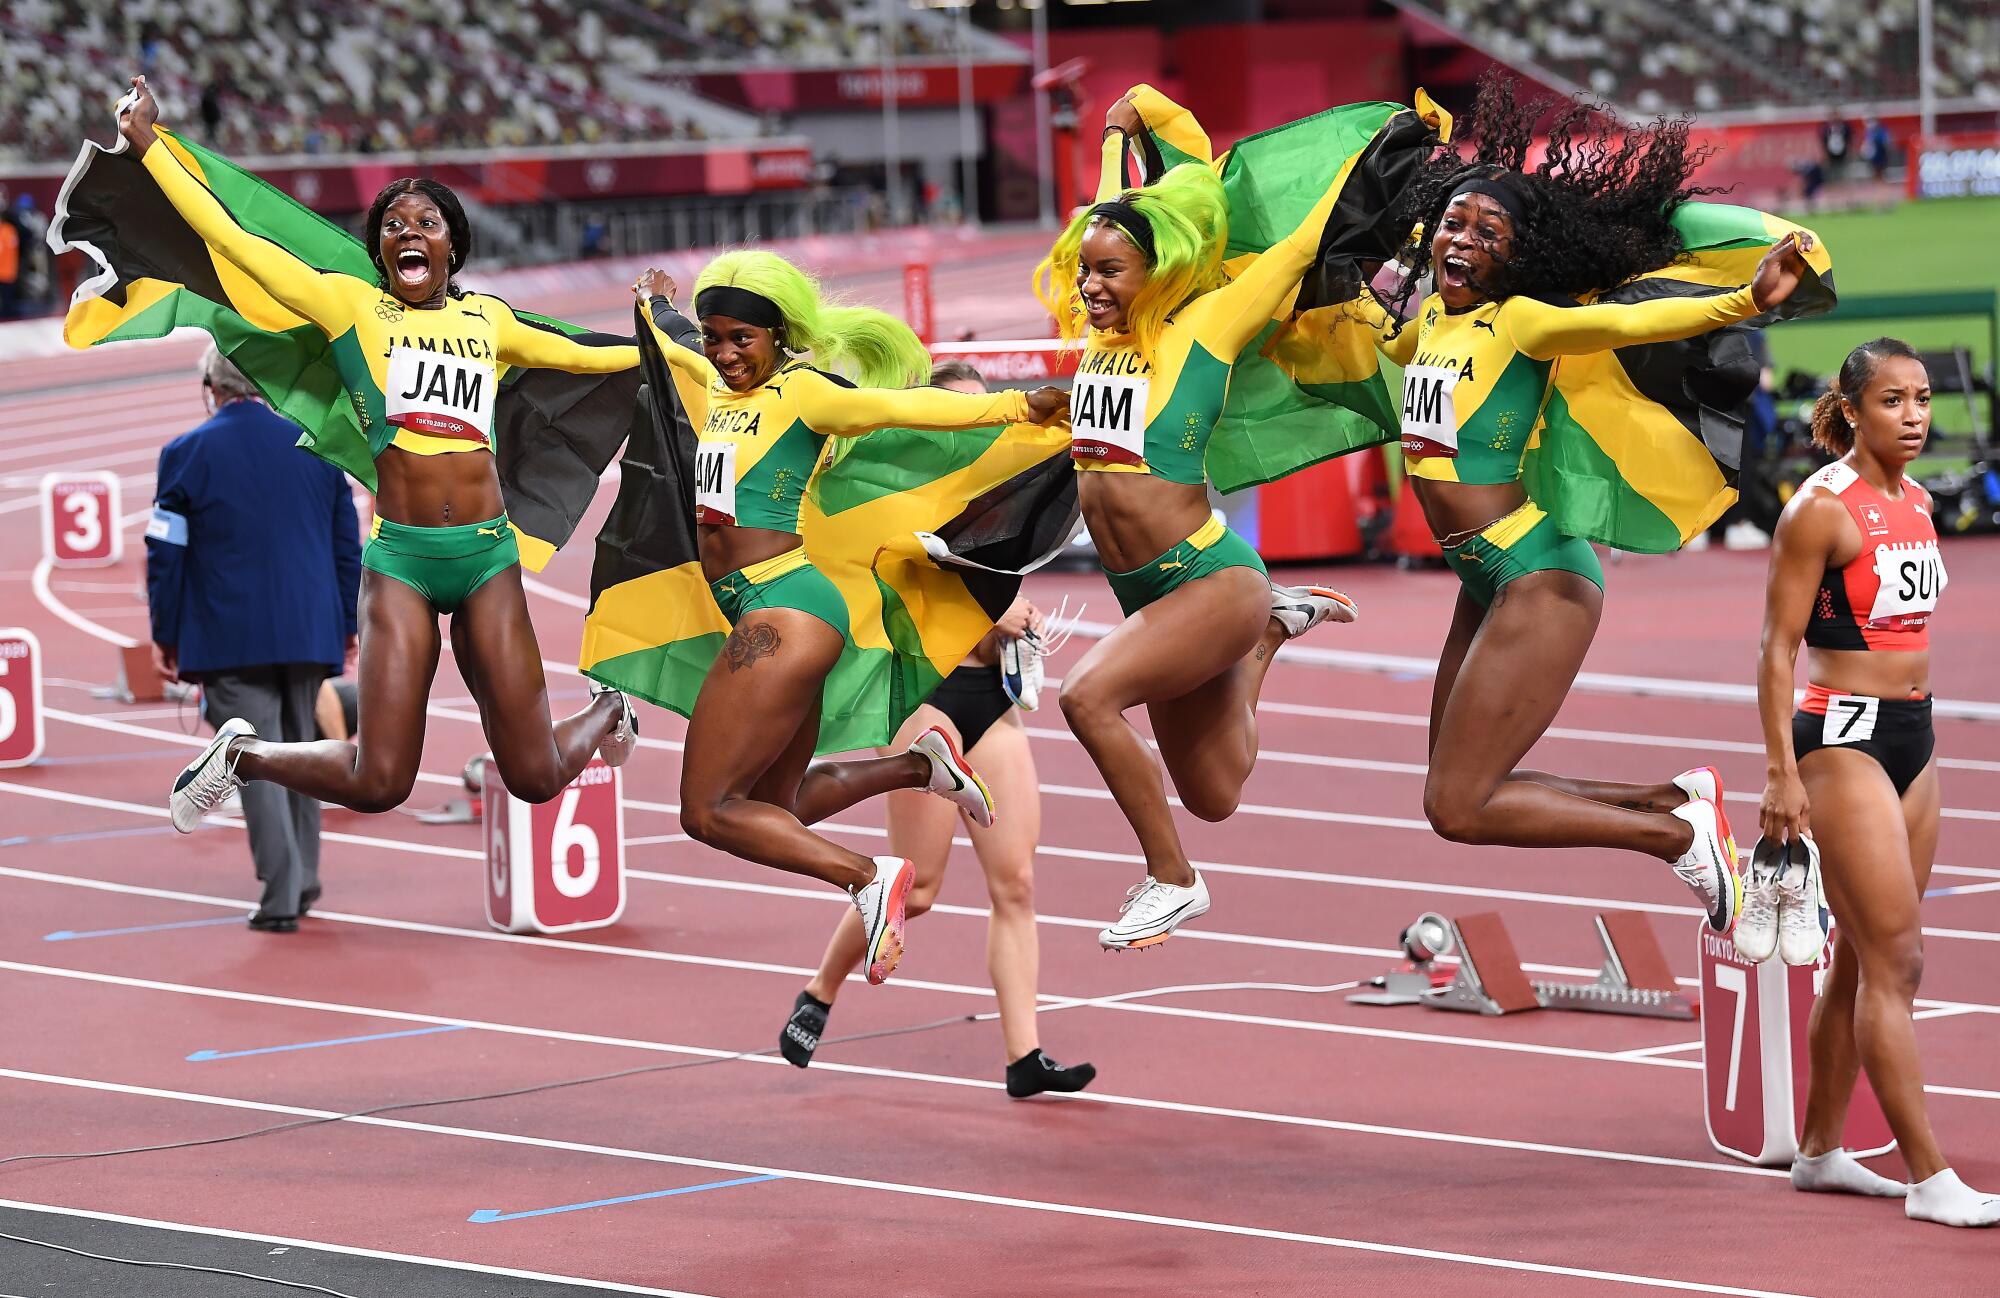 Members of Jamaica women's 400 relay team celebrate after winning the gold medal.